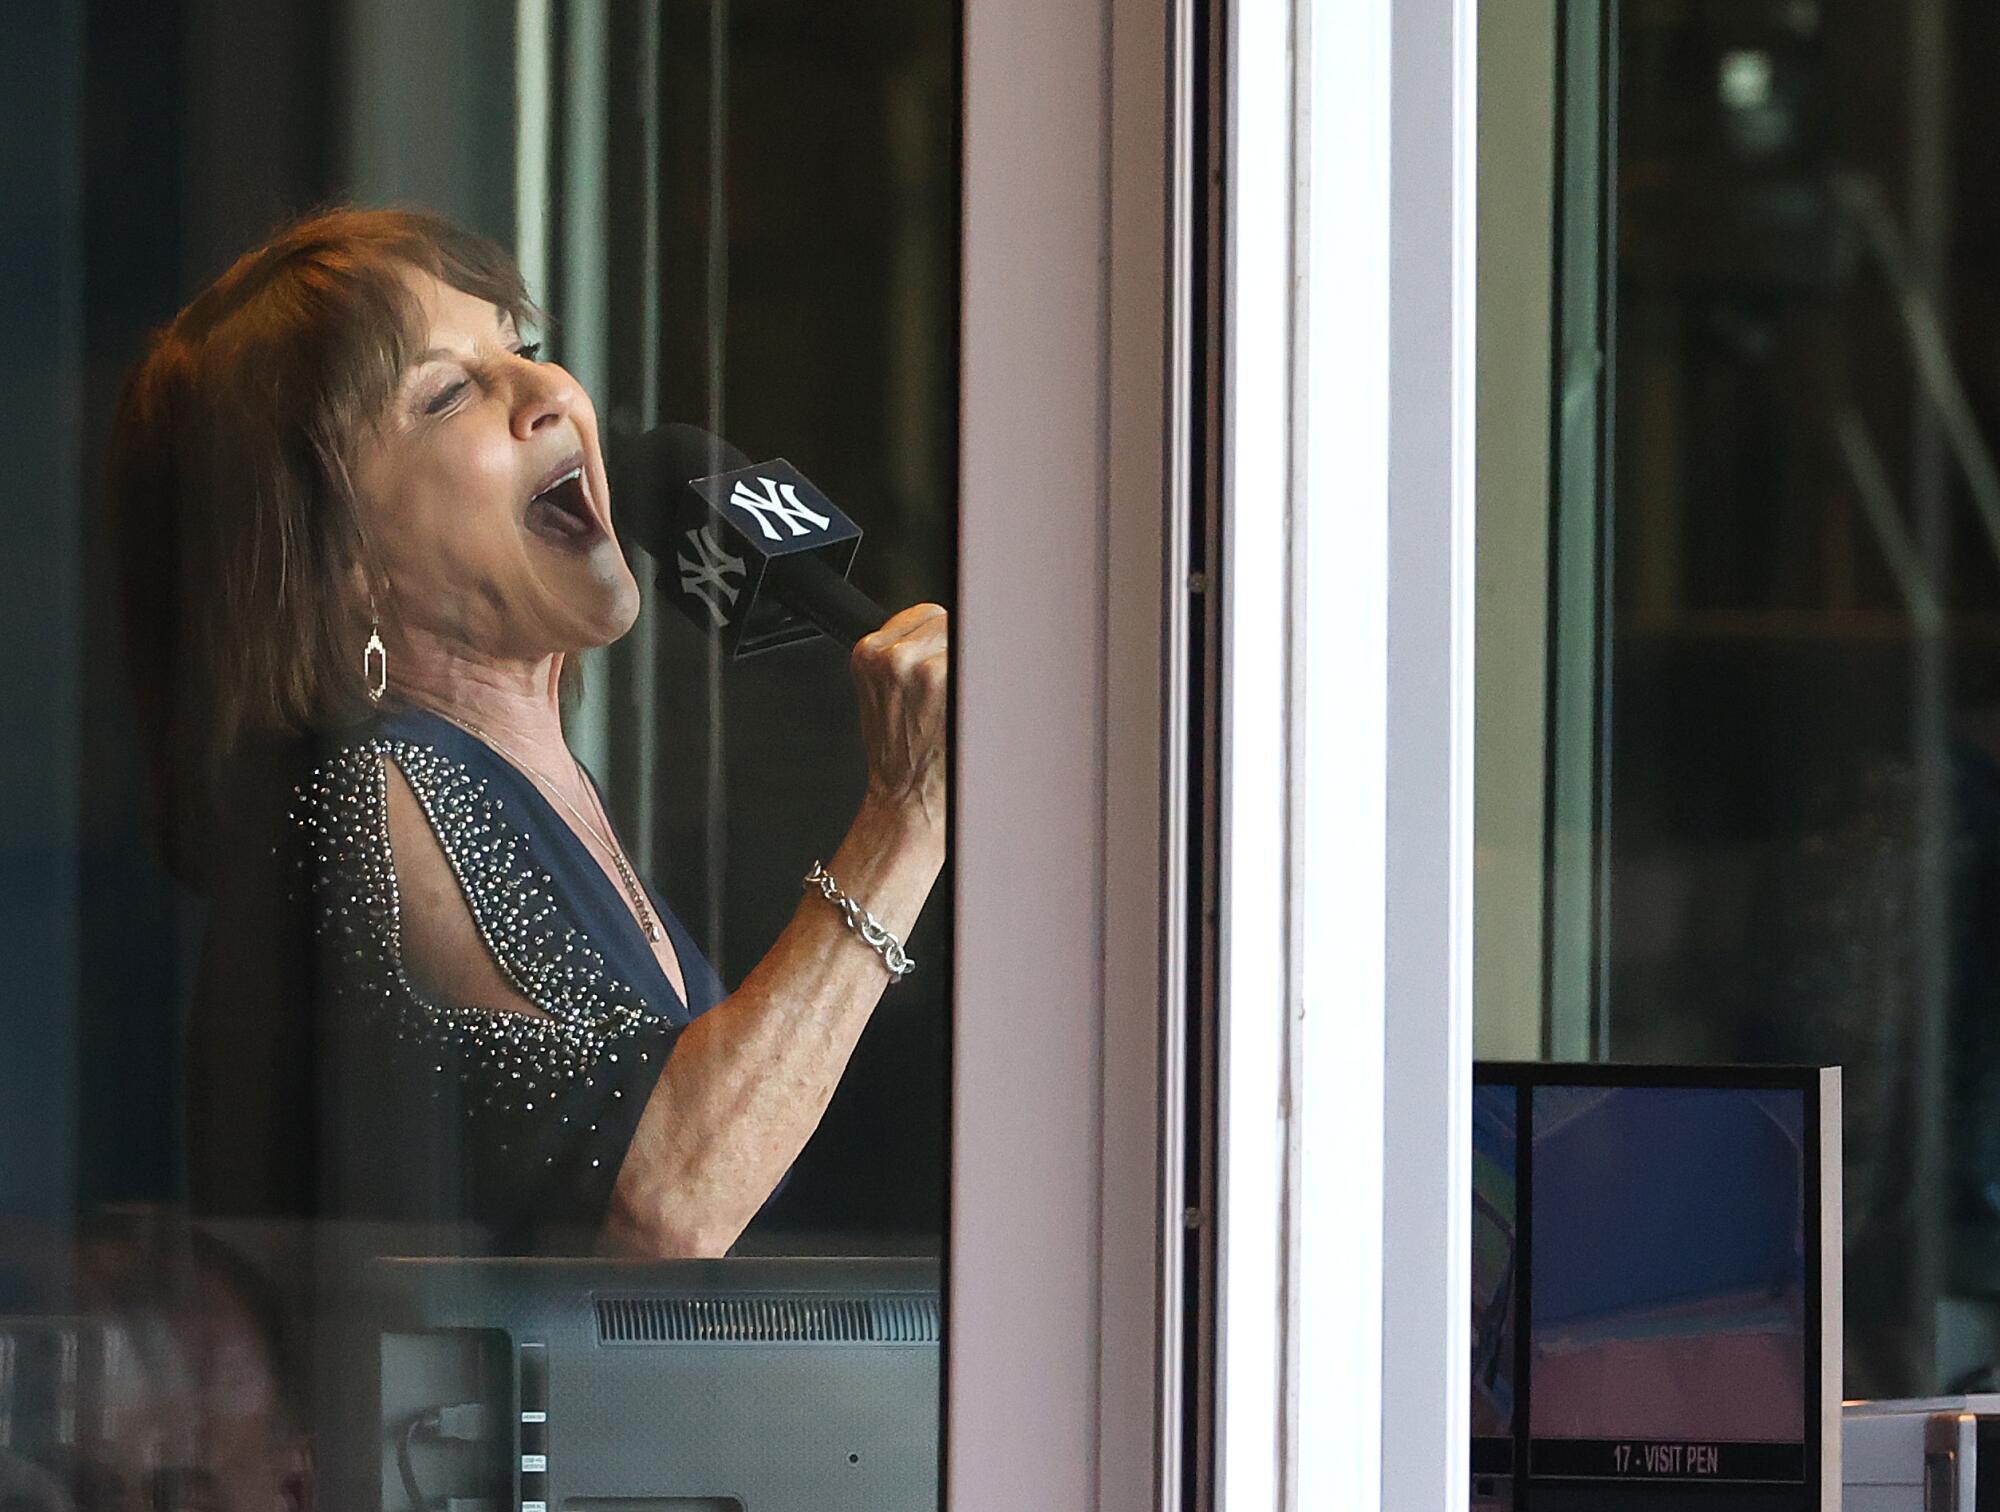 New York Yankees radio announcer Suzyn Waldman sings the national anthem from the broadcasting booth